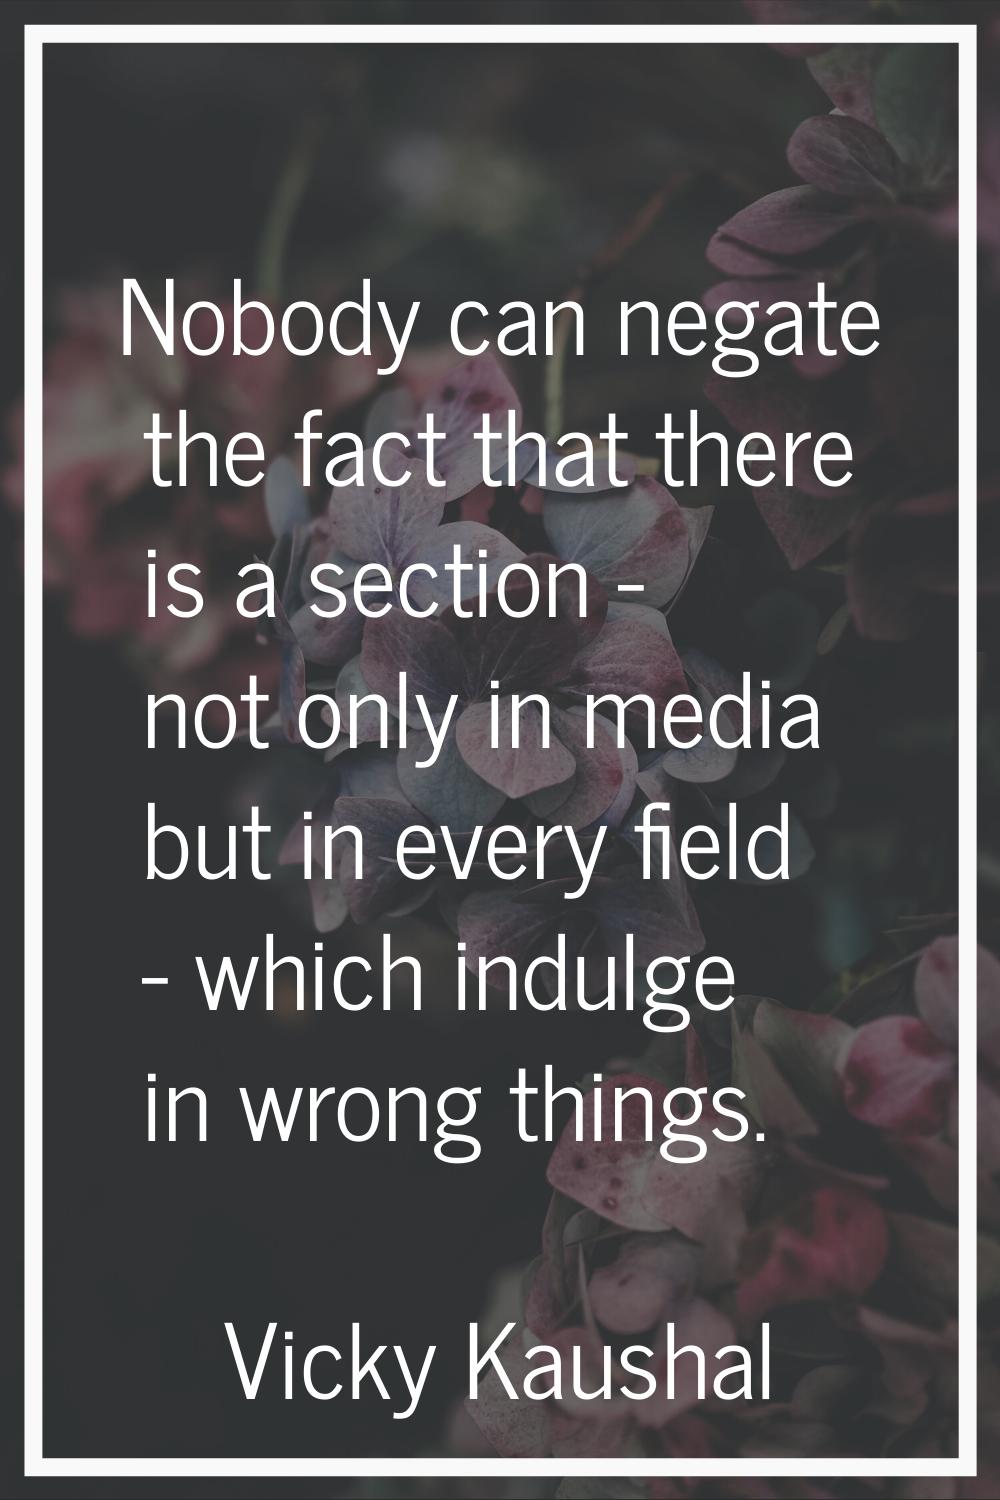 Nobody can negate the fact that there is a section - not only in media but in every field - which i